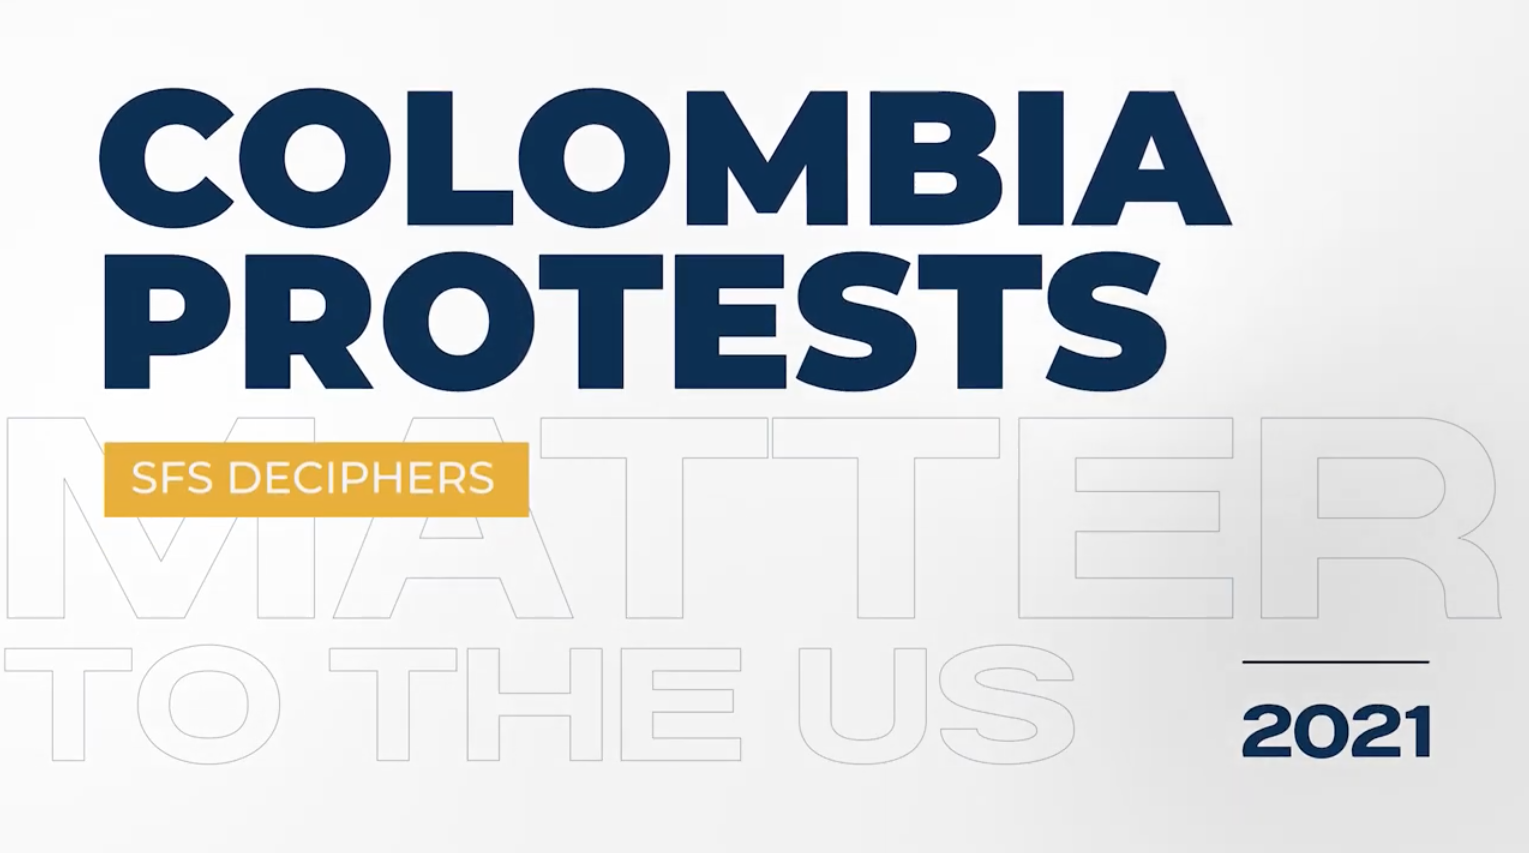 Who is behind violence in the Colombia protests?